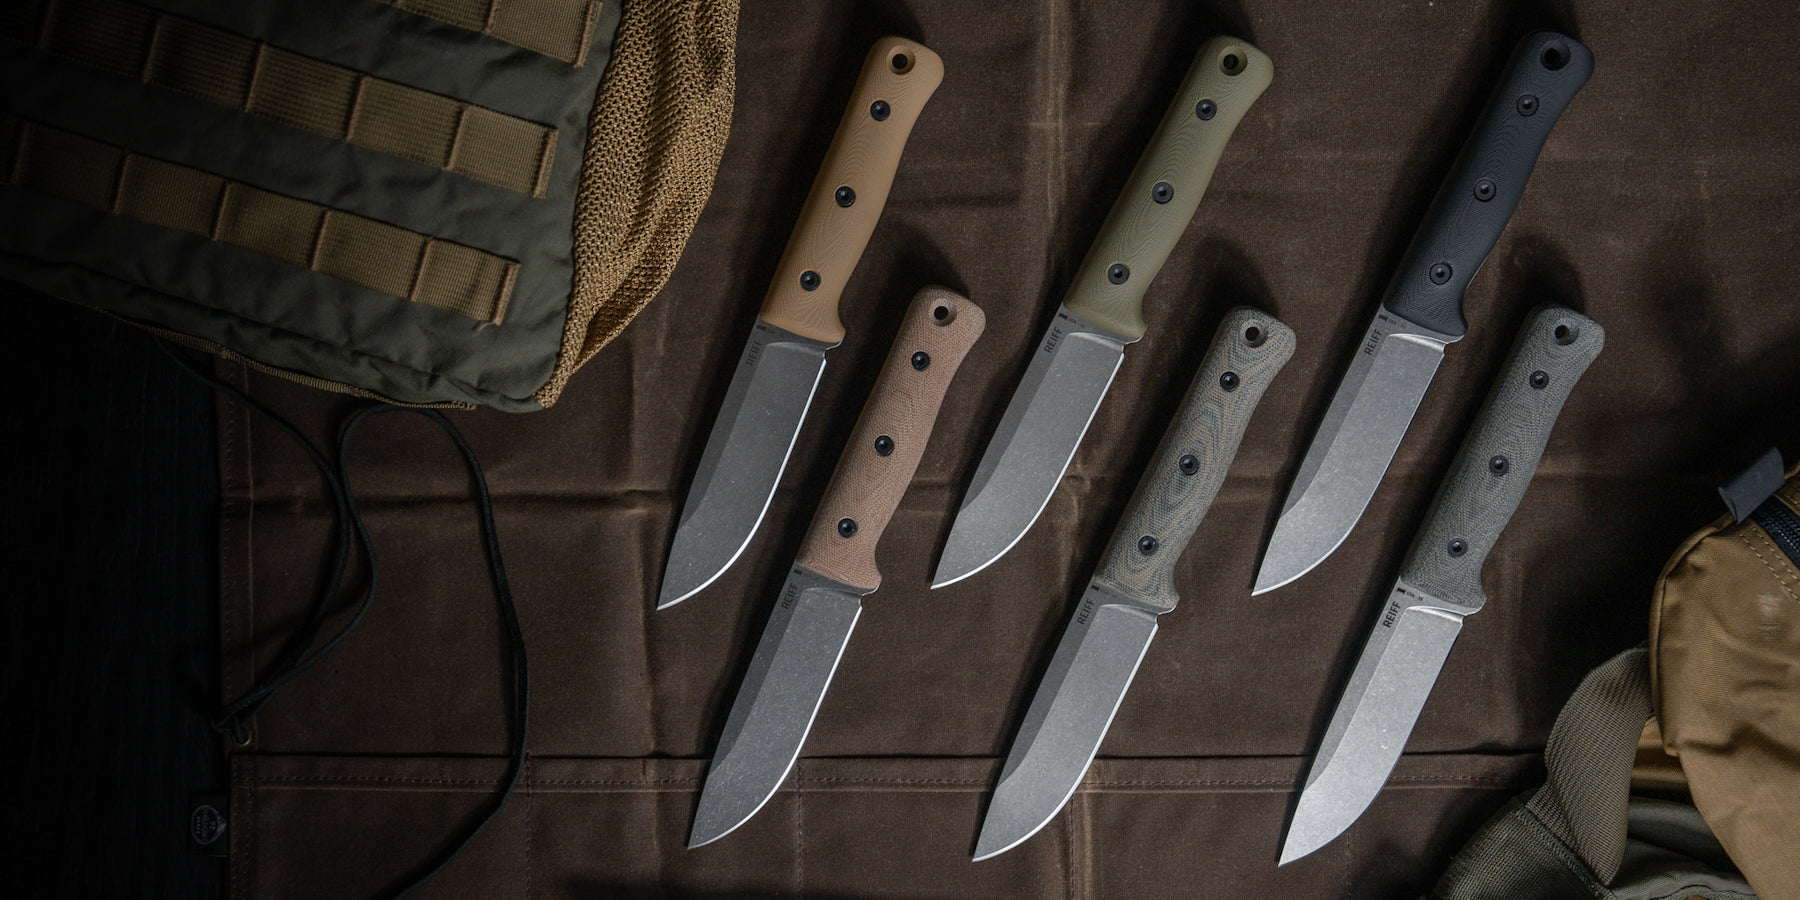 The new Reiff Knives MagnaCut and Micarta F4 Bushcraft Survival Knife